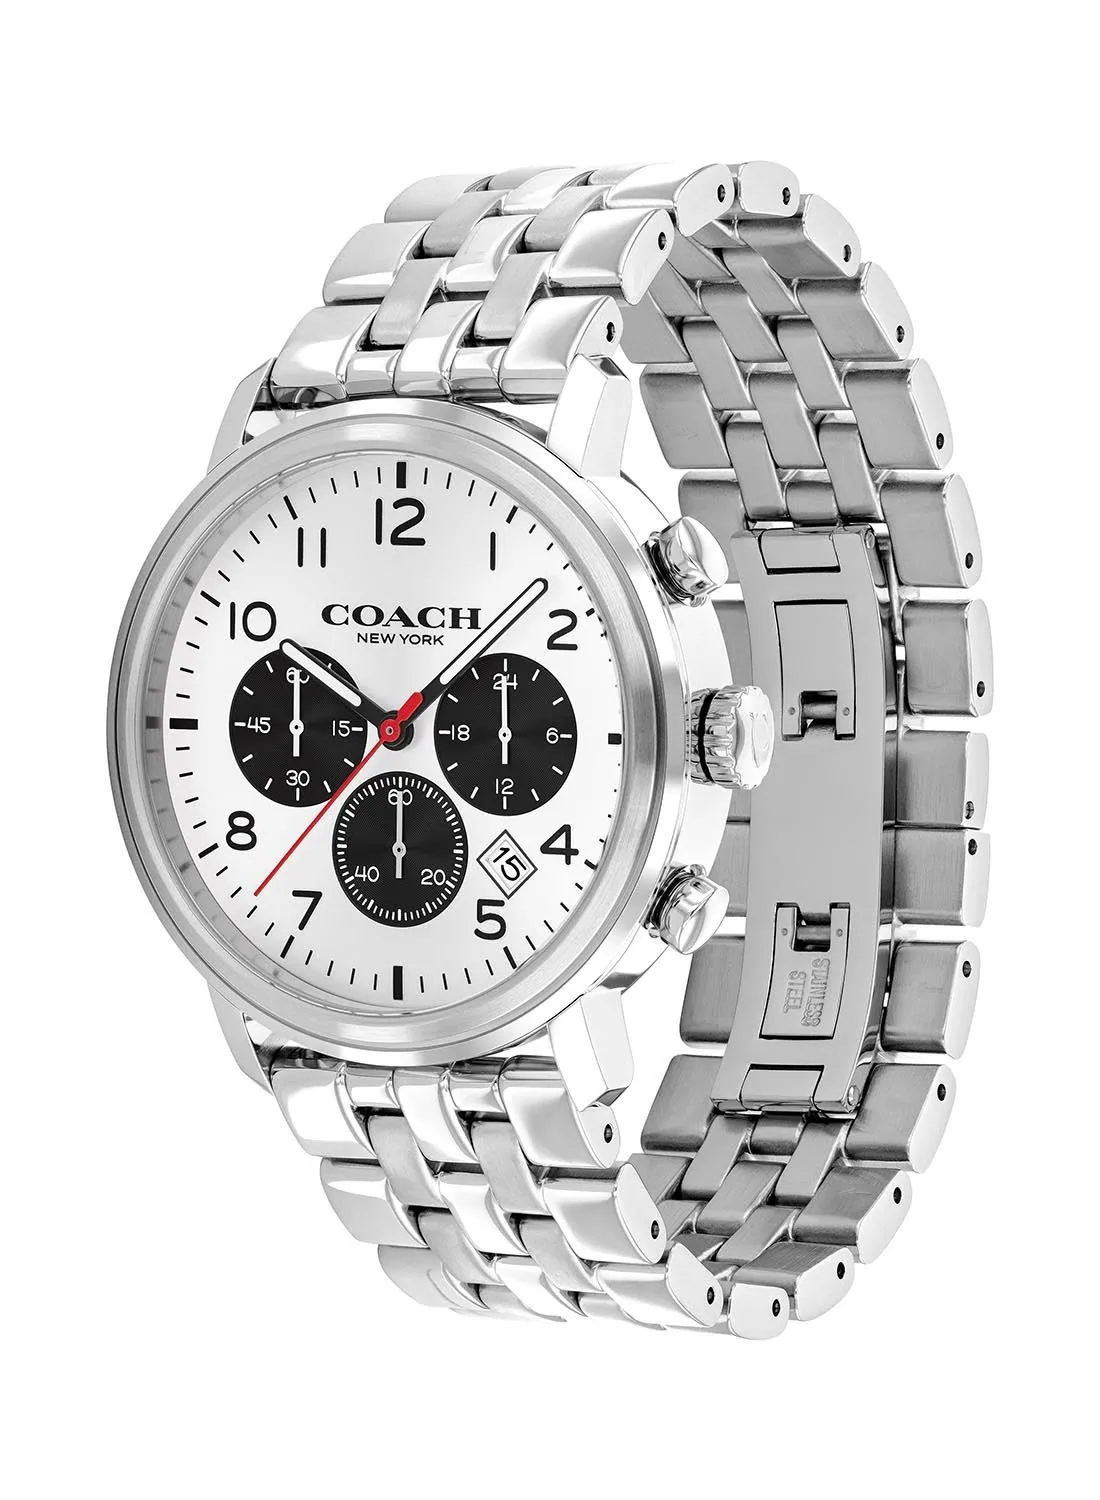 COACH Chronograph Round Wrist Watch With Stainless Steel Strap 14602529